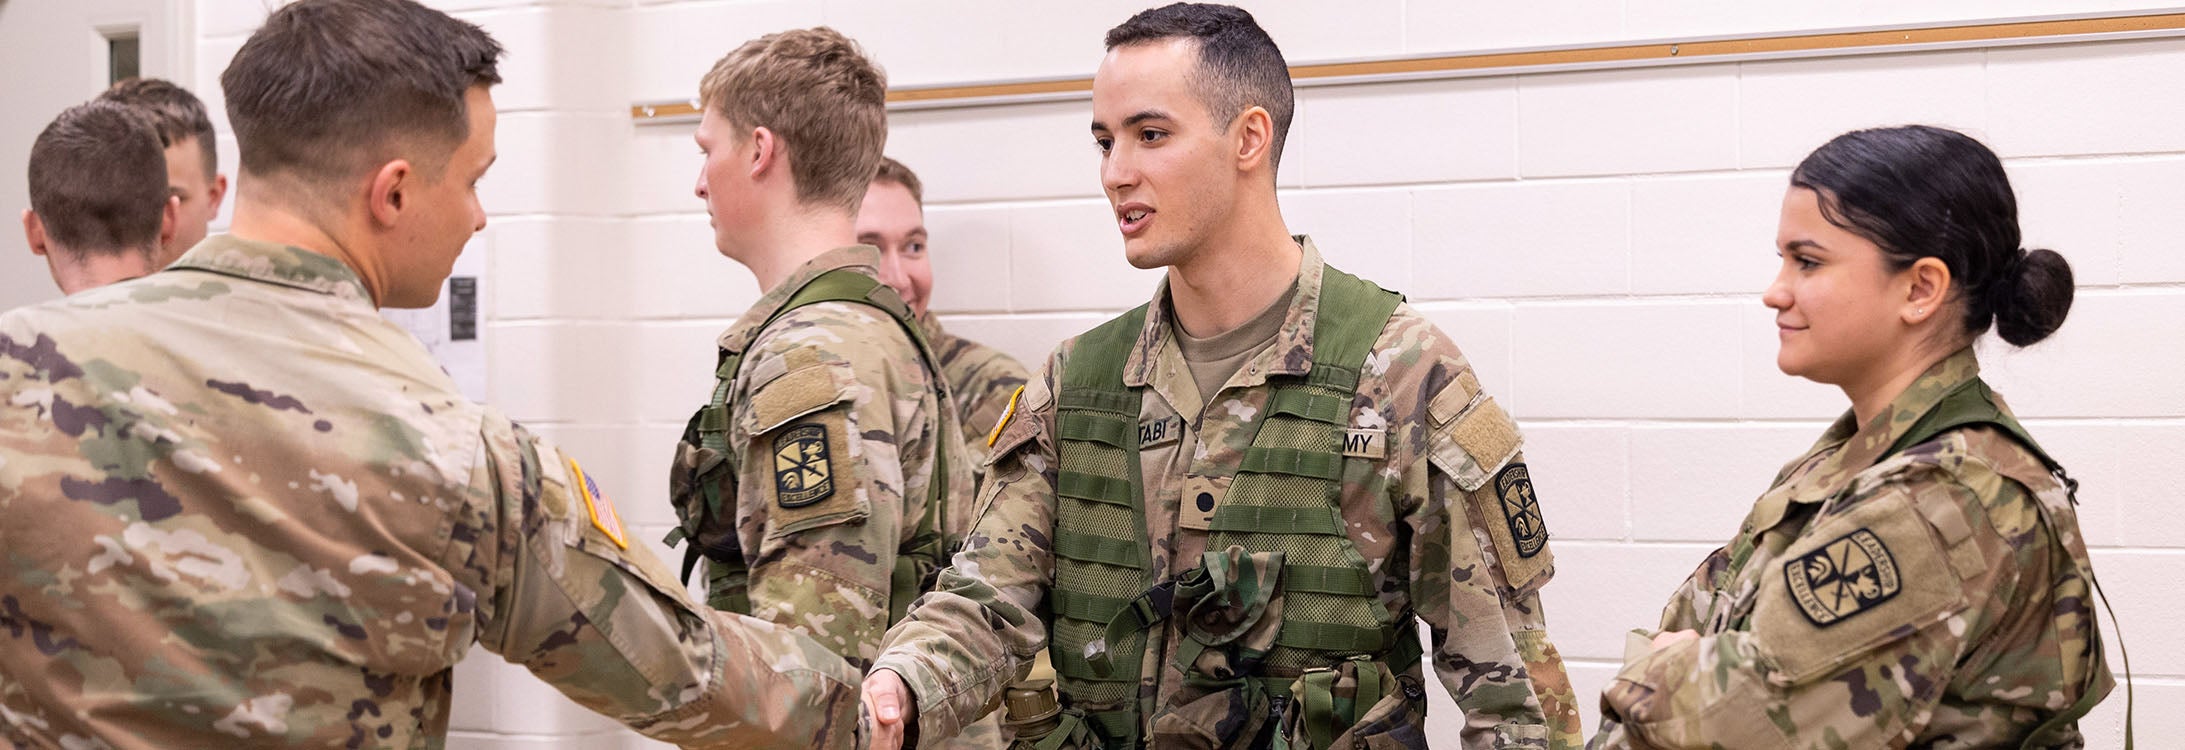 East Carolina University Army ROTC member Sifeddine Chettabi shakes hands with 112th Special Operations Signal Battalion (Airborne) Capt. Ausdin Pender during a visit to campus. Army leaders spoke to students about career aspirations, while ECU representatives shared their leadership and lab experiences.